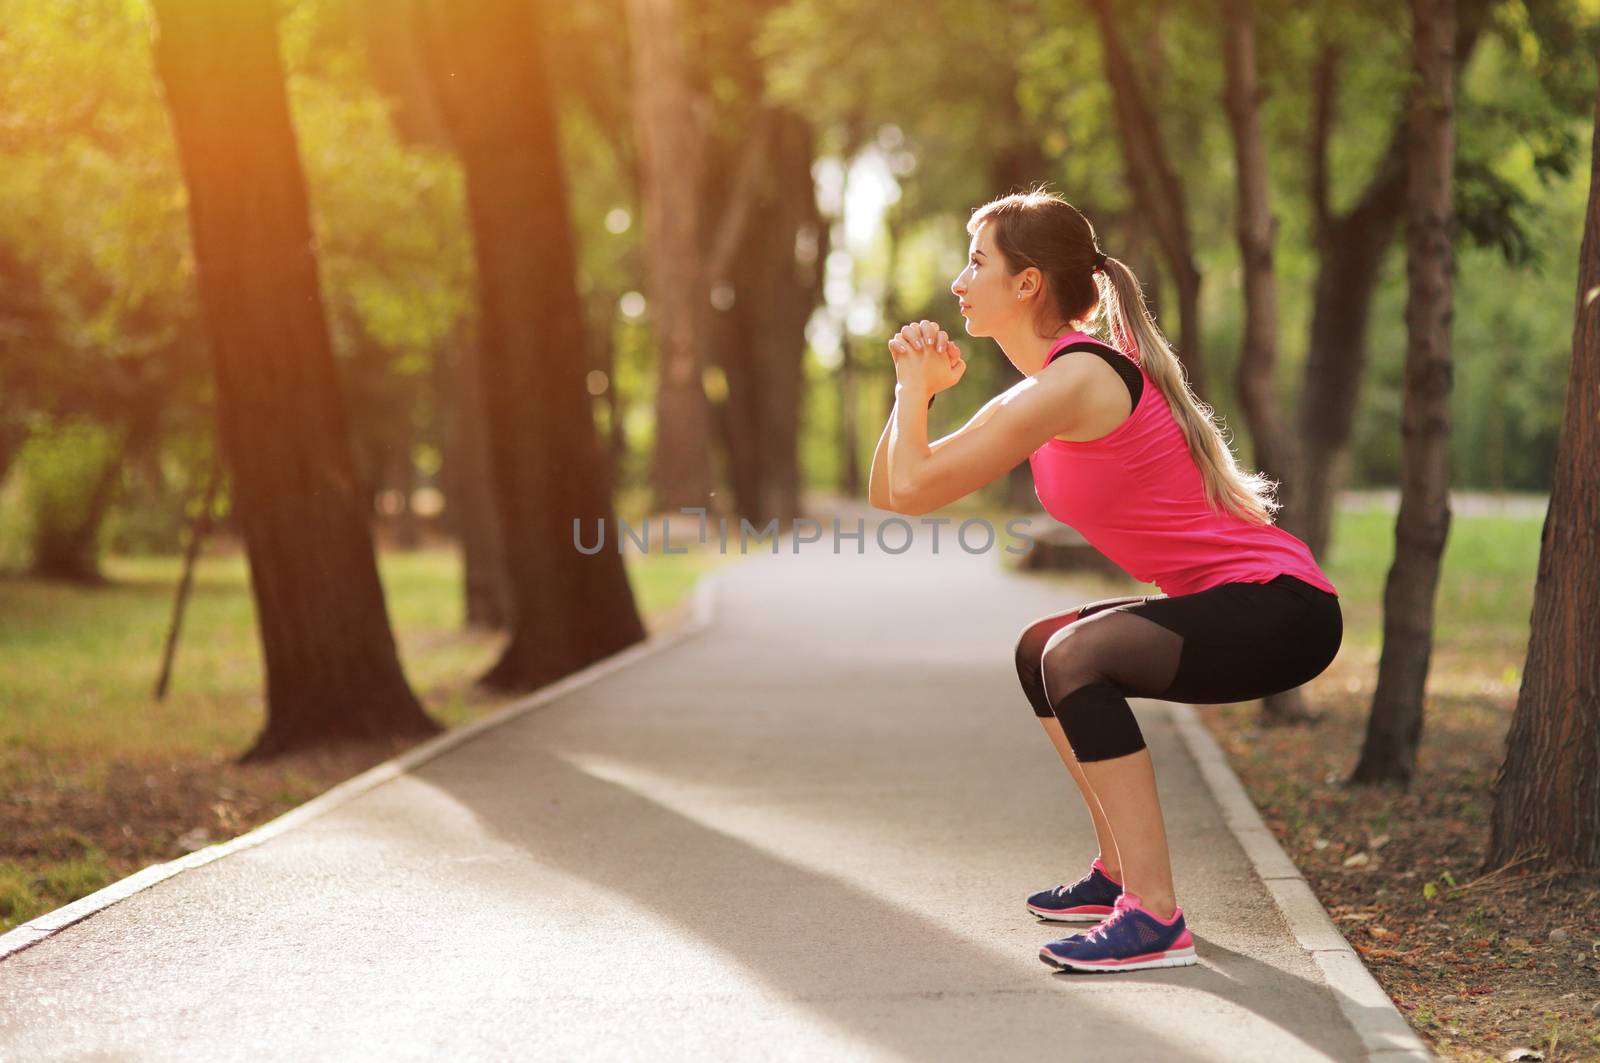 The young woman is engaged in sports fitness in nature forest Healthy fit living. Motivation healthy fit living. Running shoe. Beautiful sunlight. Woman warming up before running. Squats